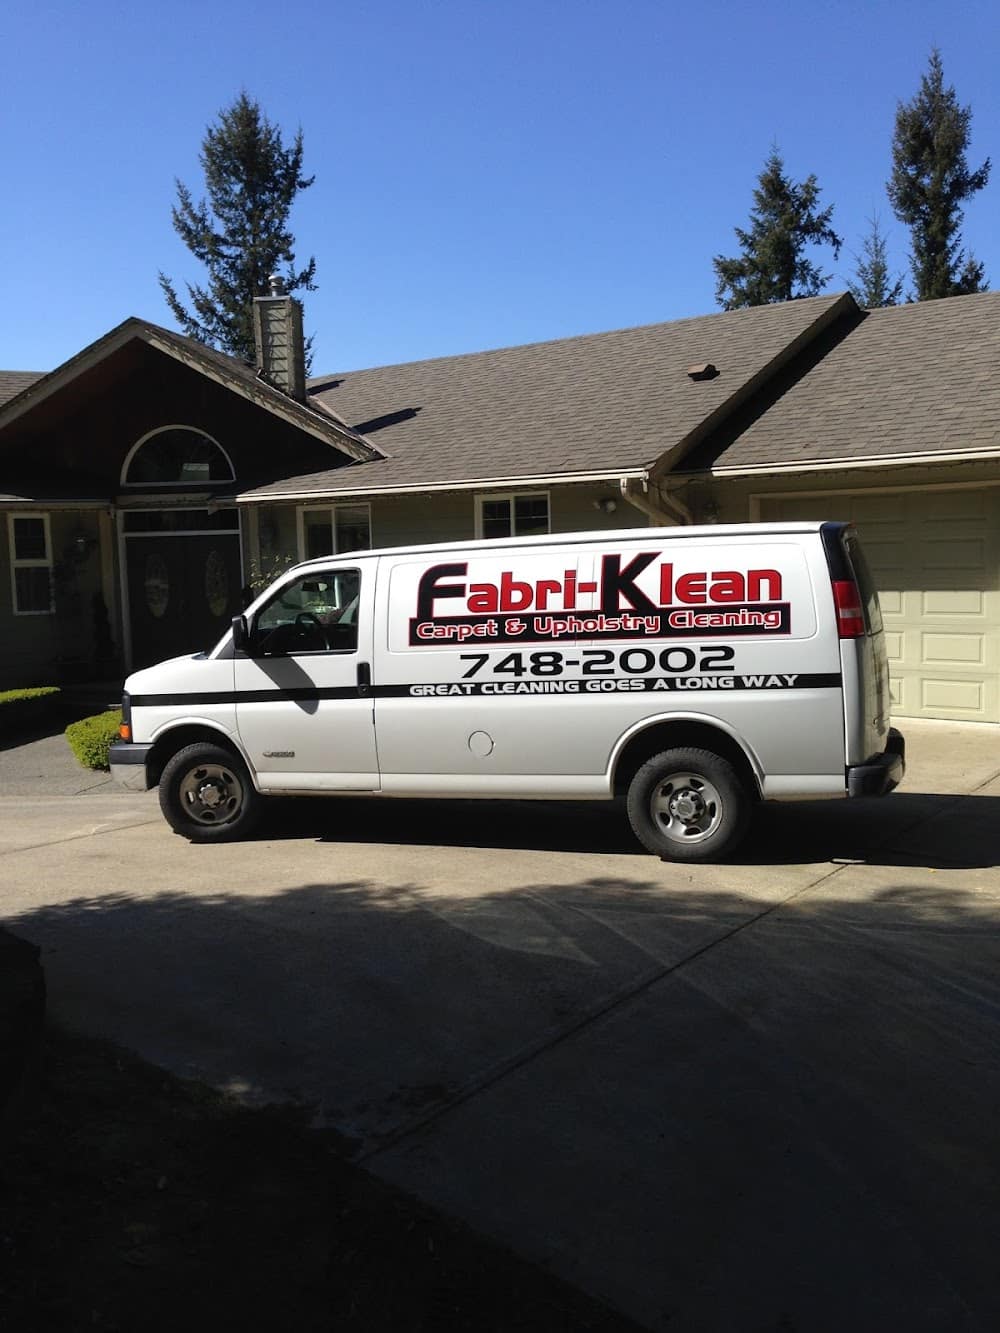 Fabri-Klean Carpet & Upholstery Cleaning